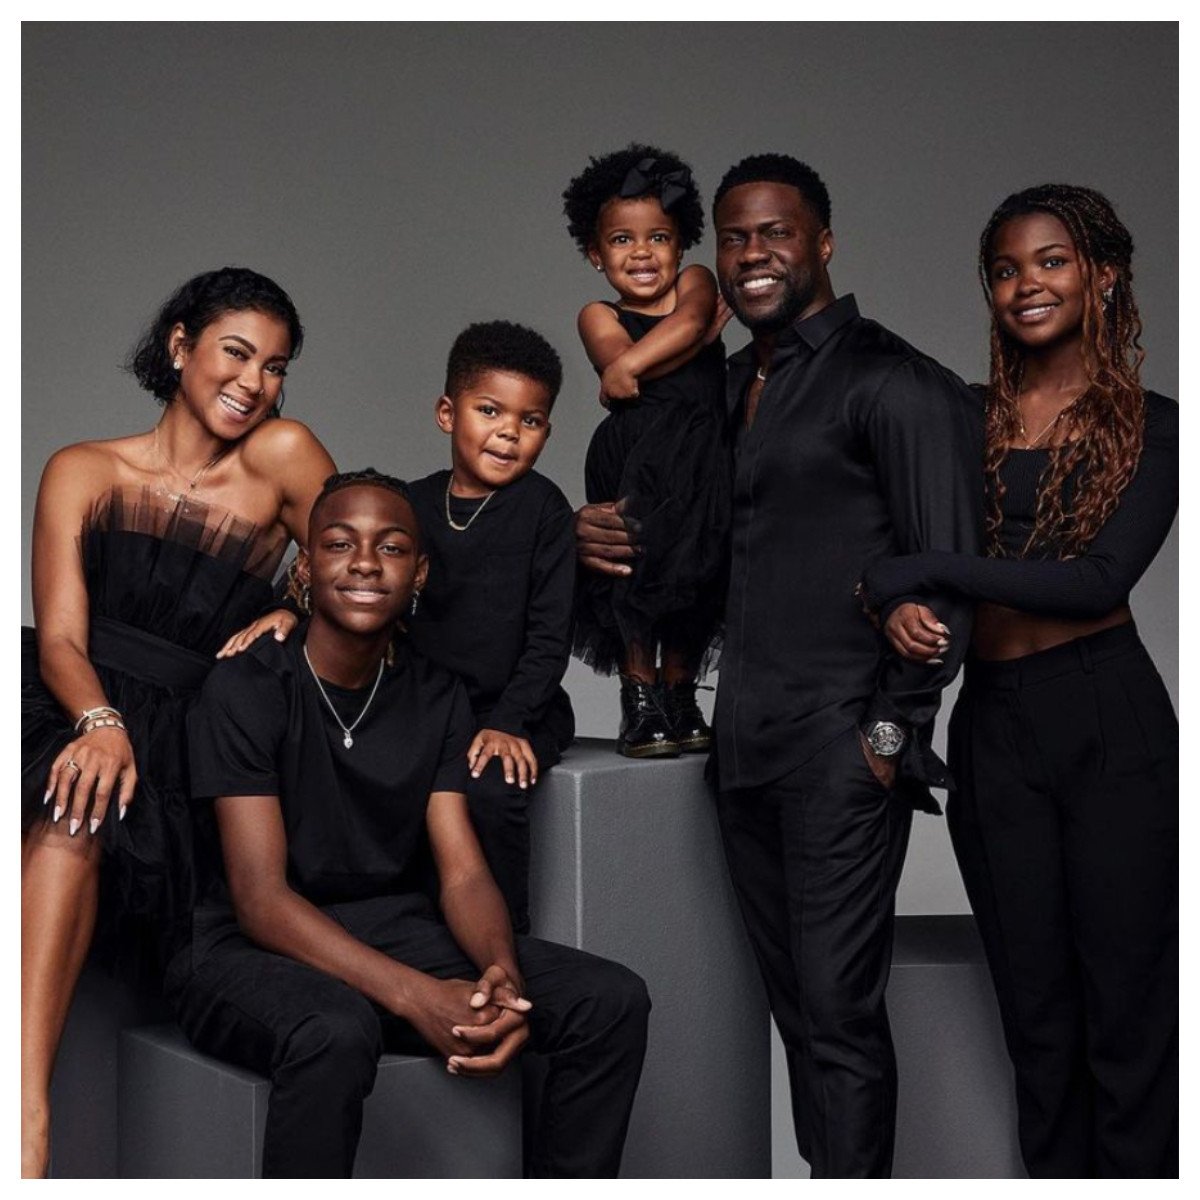 Did you know that famed comedian Kevin Hart (second from right) has four kids? Photo: @kevinhart4real/Instagram
